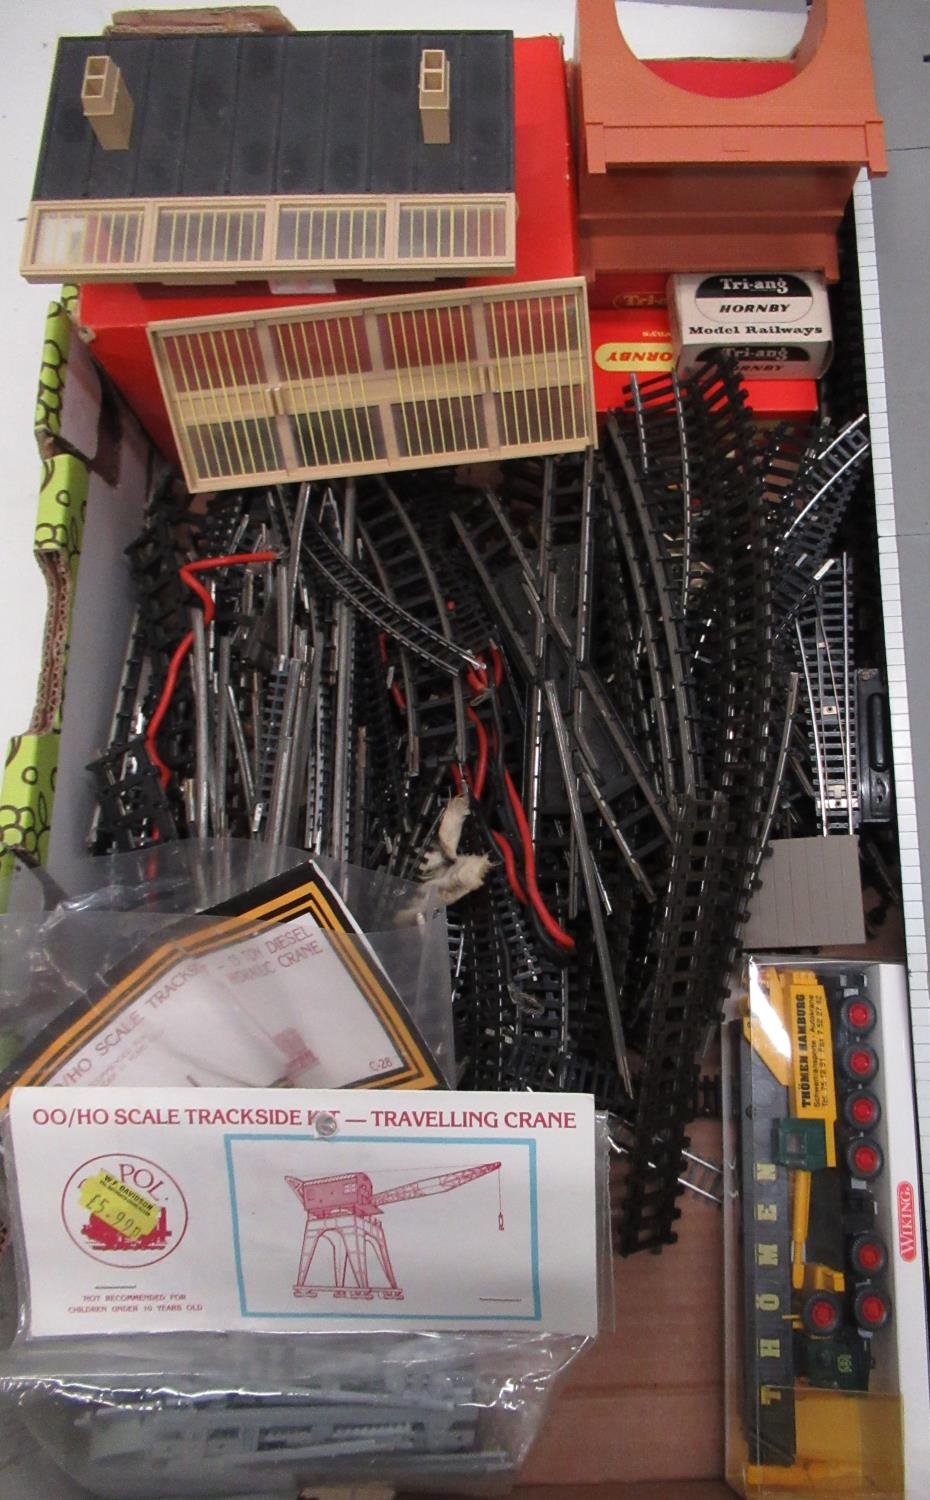 Collection of Hornby Triang OO gauge accessories including track, station etc boxed (3), Dapol